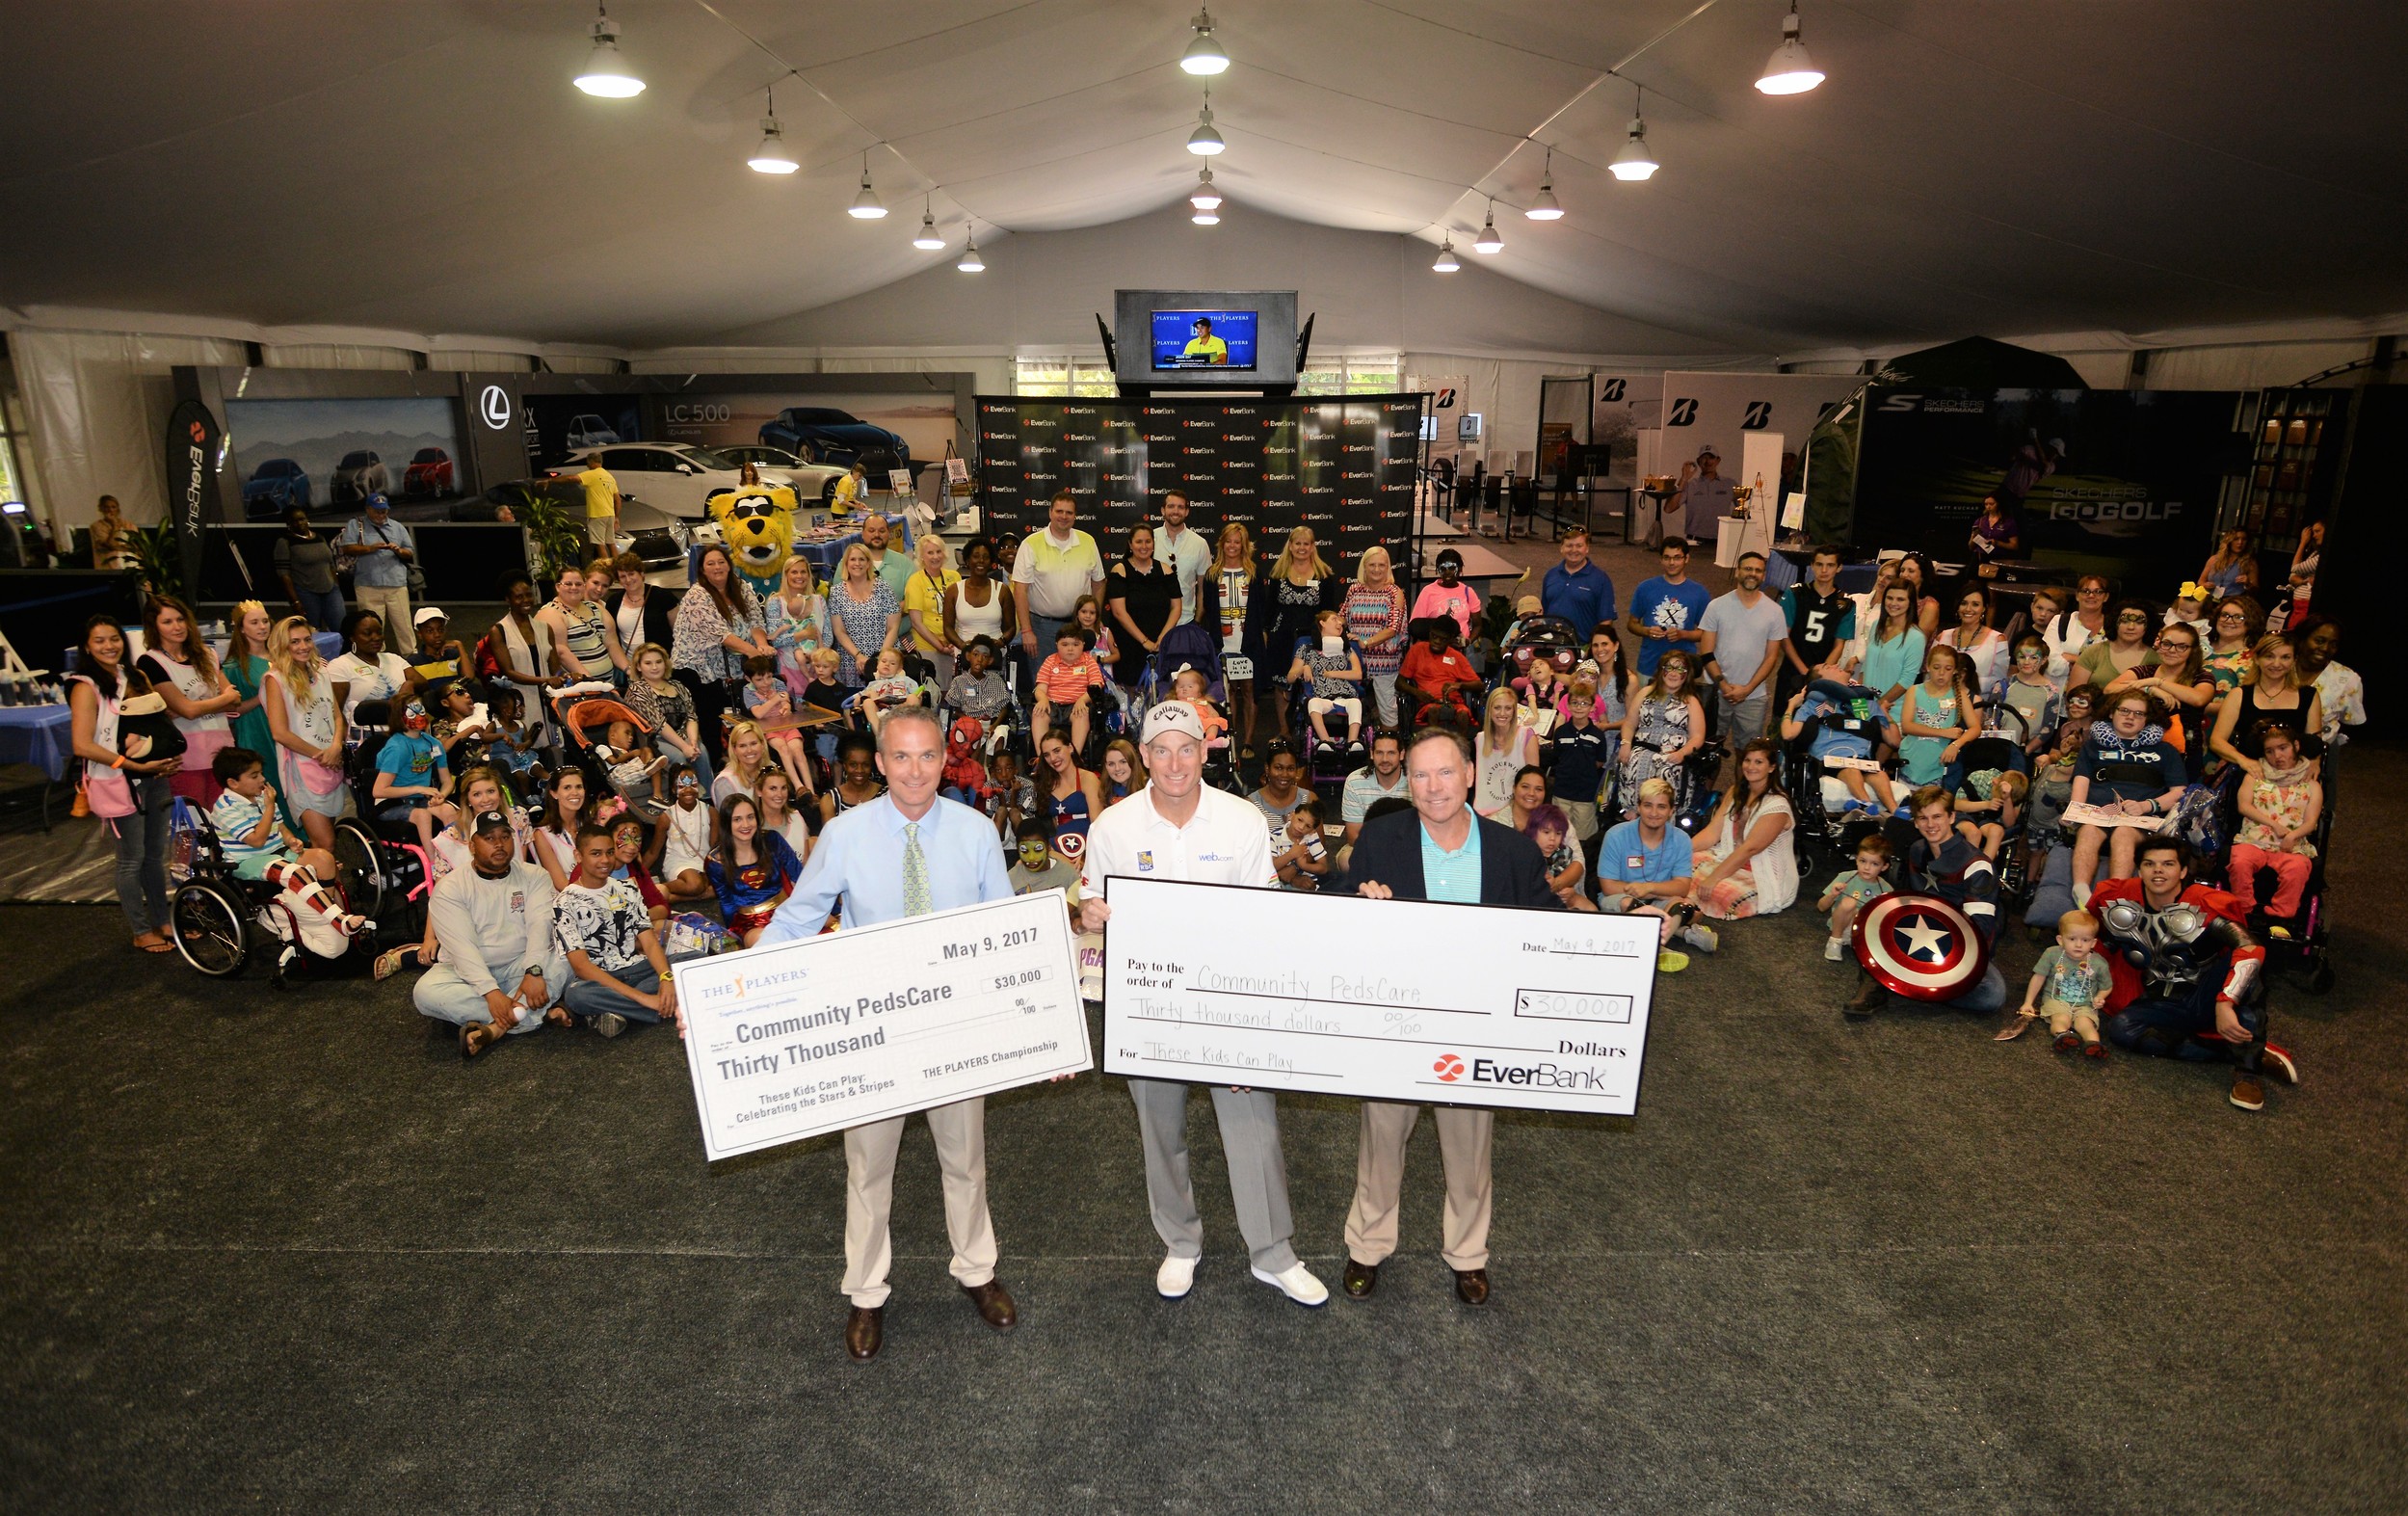 THE PLAYERS Championship Executive Director Jared Rice, PGA Tour player Jim Furyk and Everbank President of North Florida Banking Curt Cunkle display the donations to Community PedsCare.